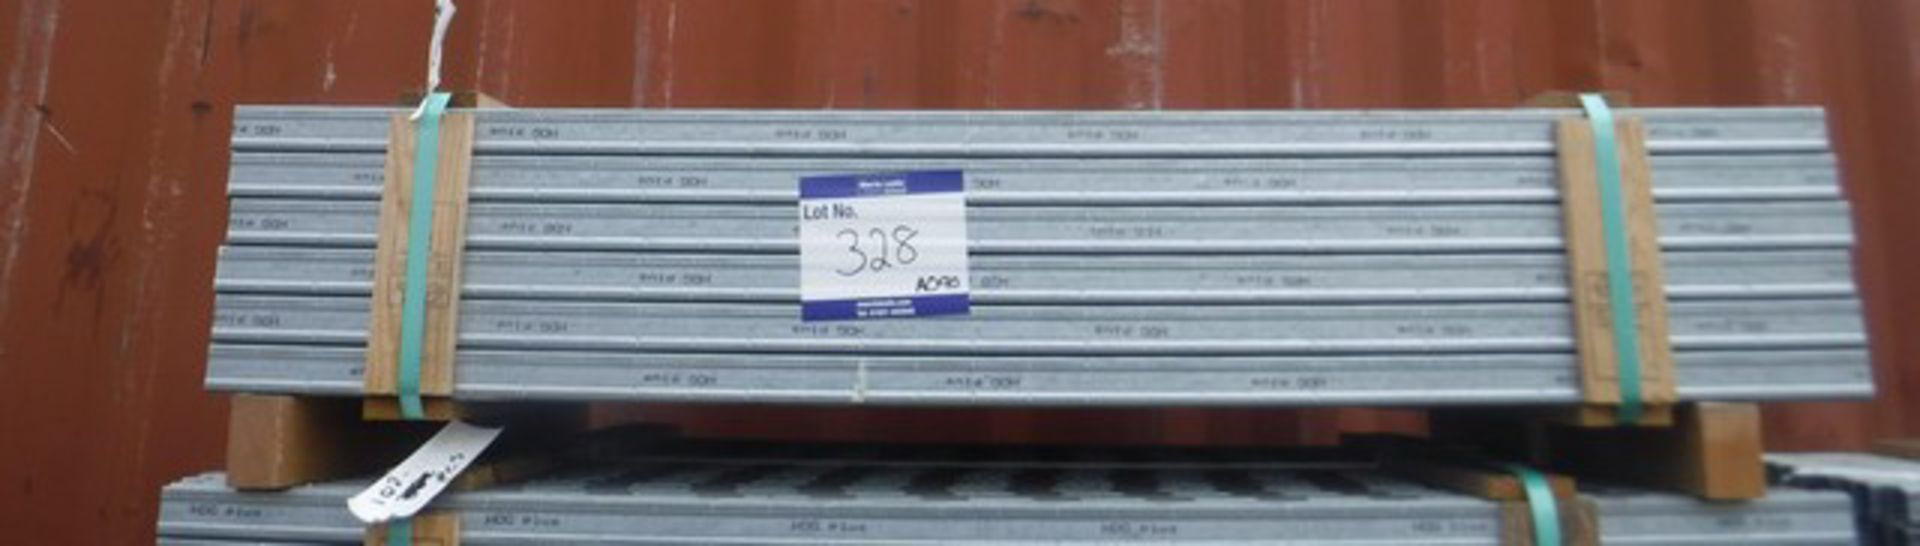 HILTI channel 1.5m long x 2mm - 108 lengths. New, used in construction for shelving.